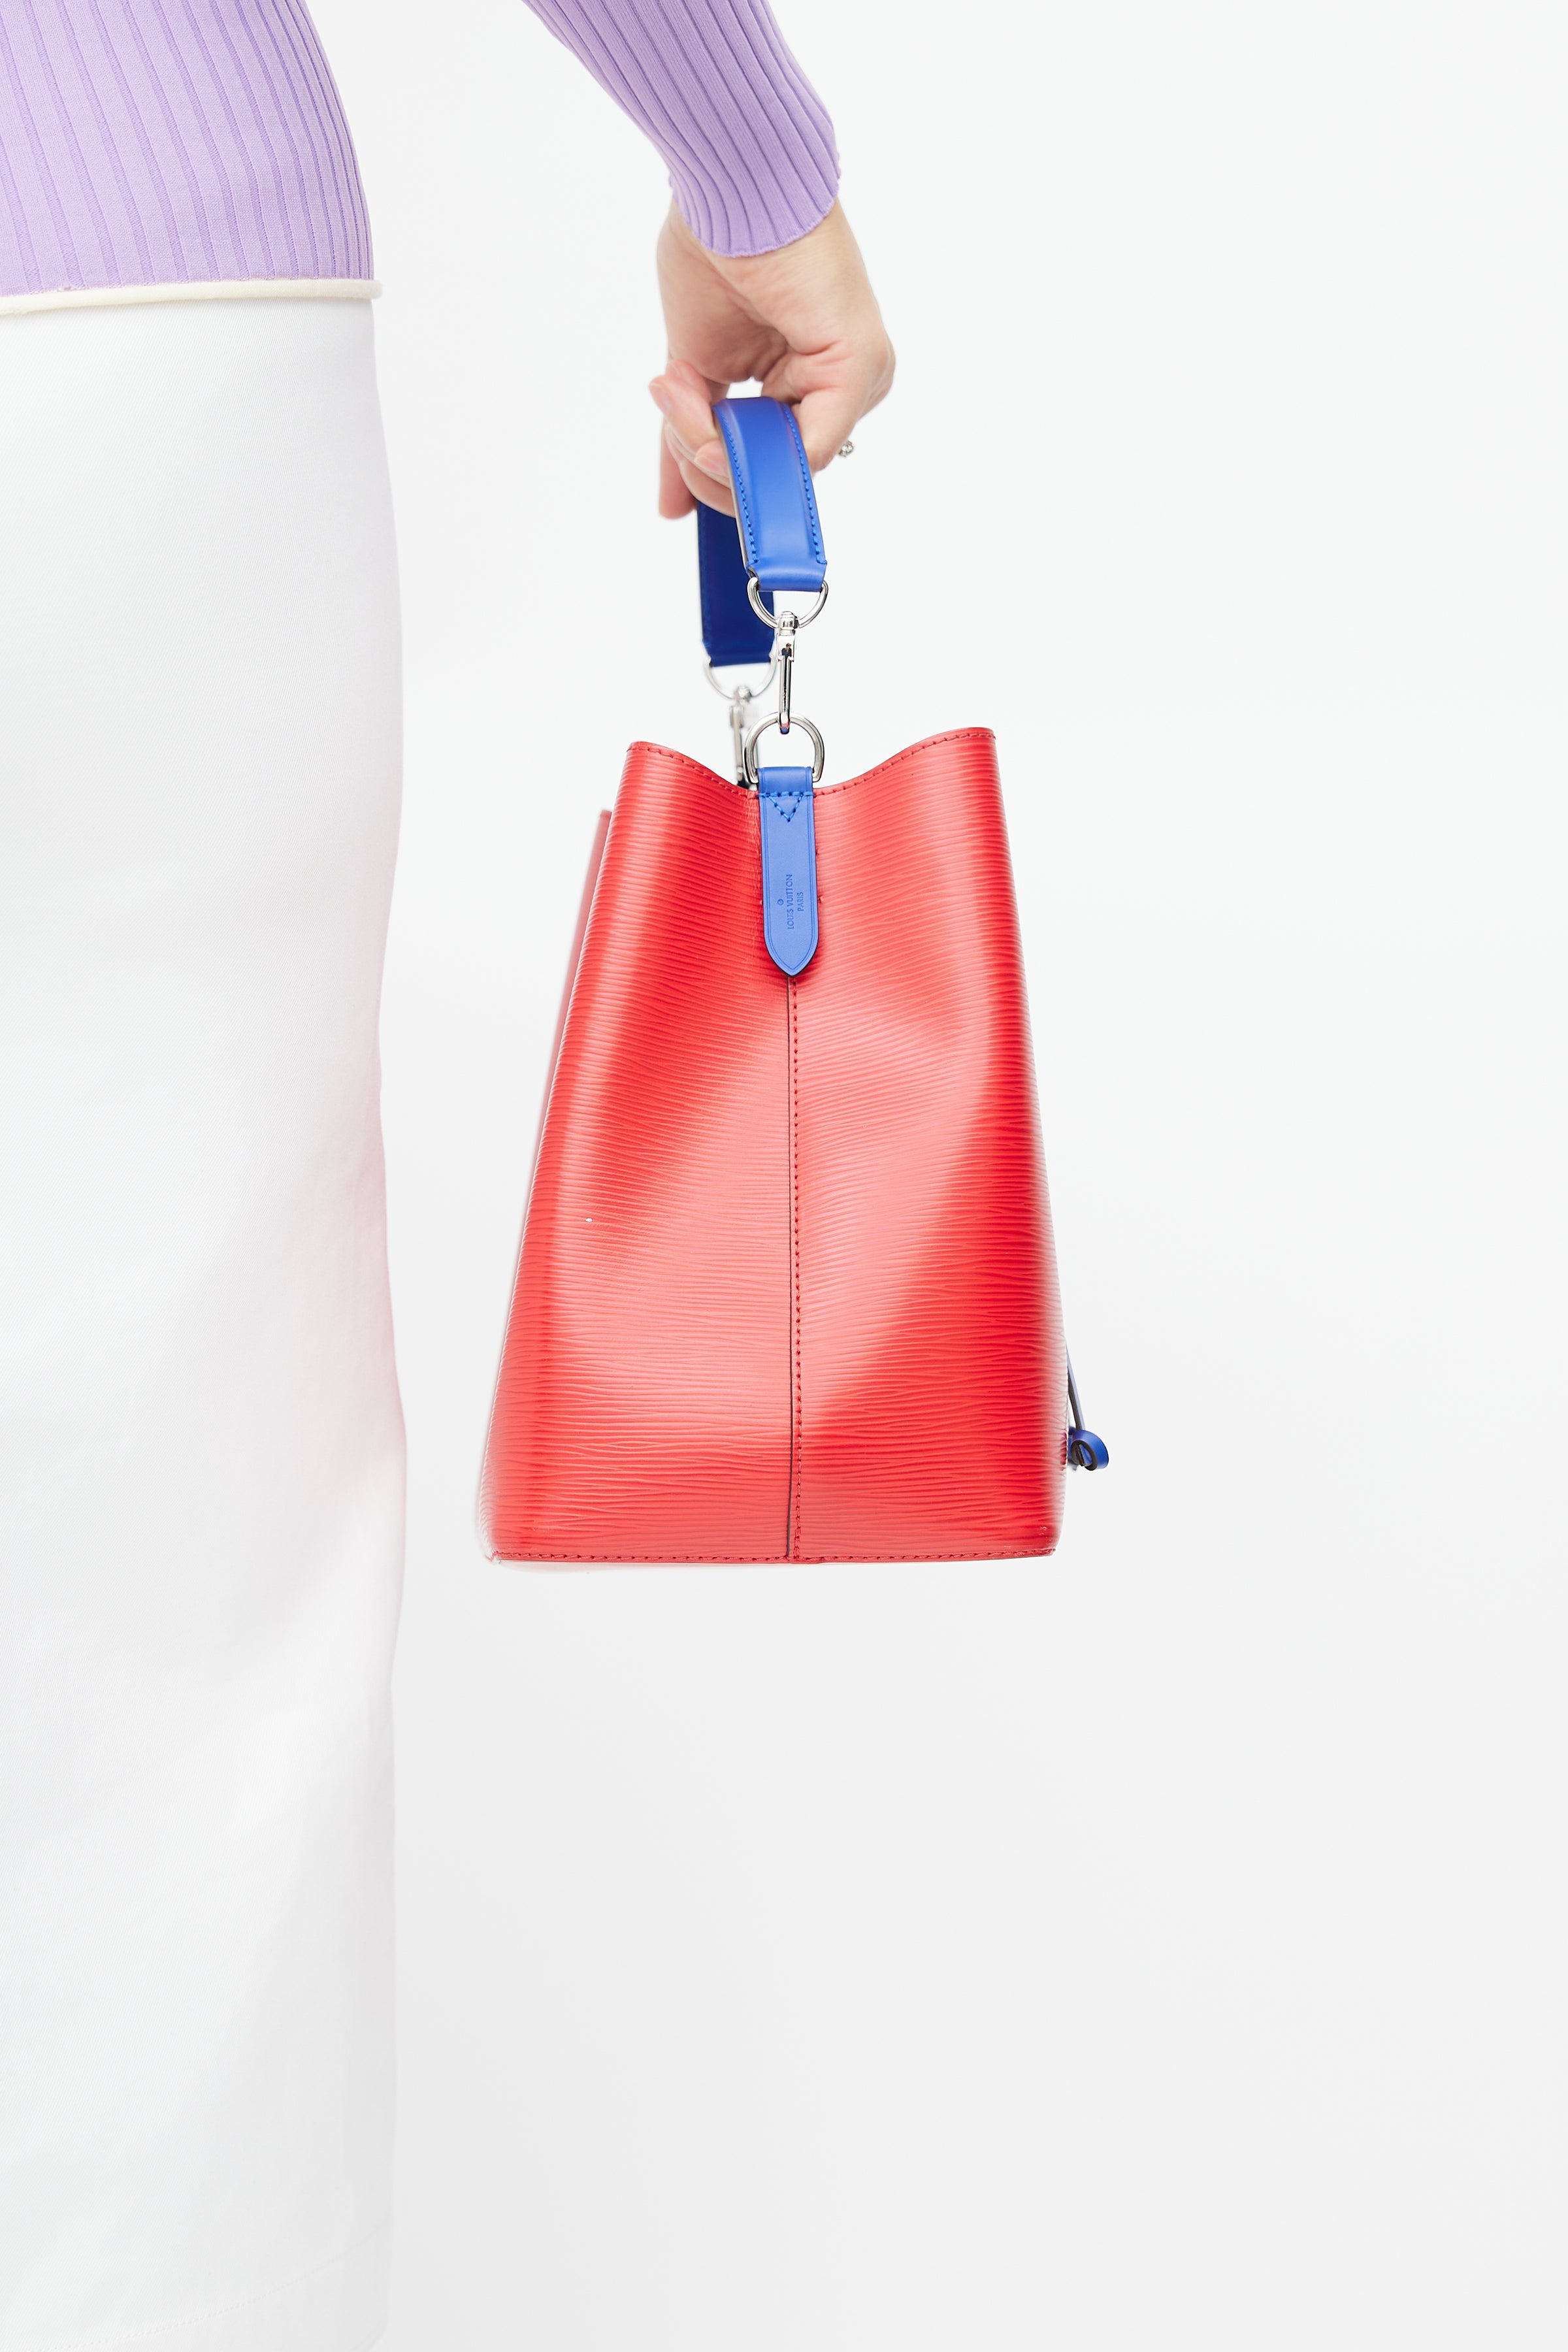 Louis Vuitton Neo Noe MM Bucket Shoulder Bag, Red and Blue Epi Leather